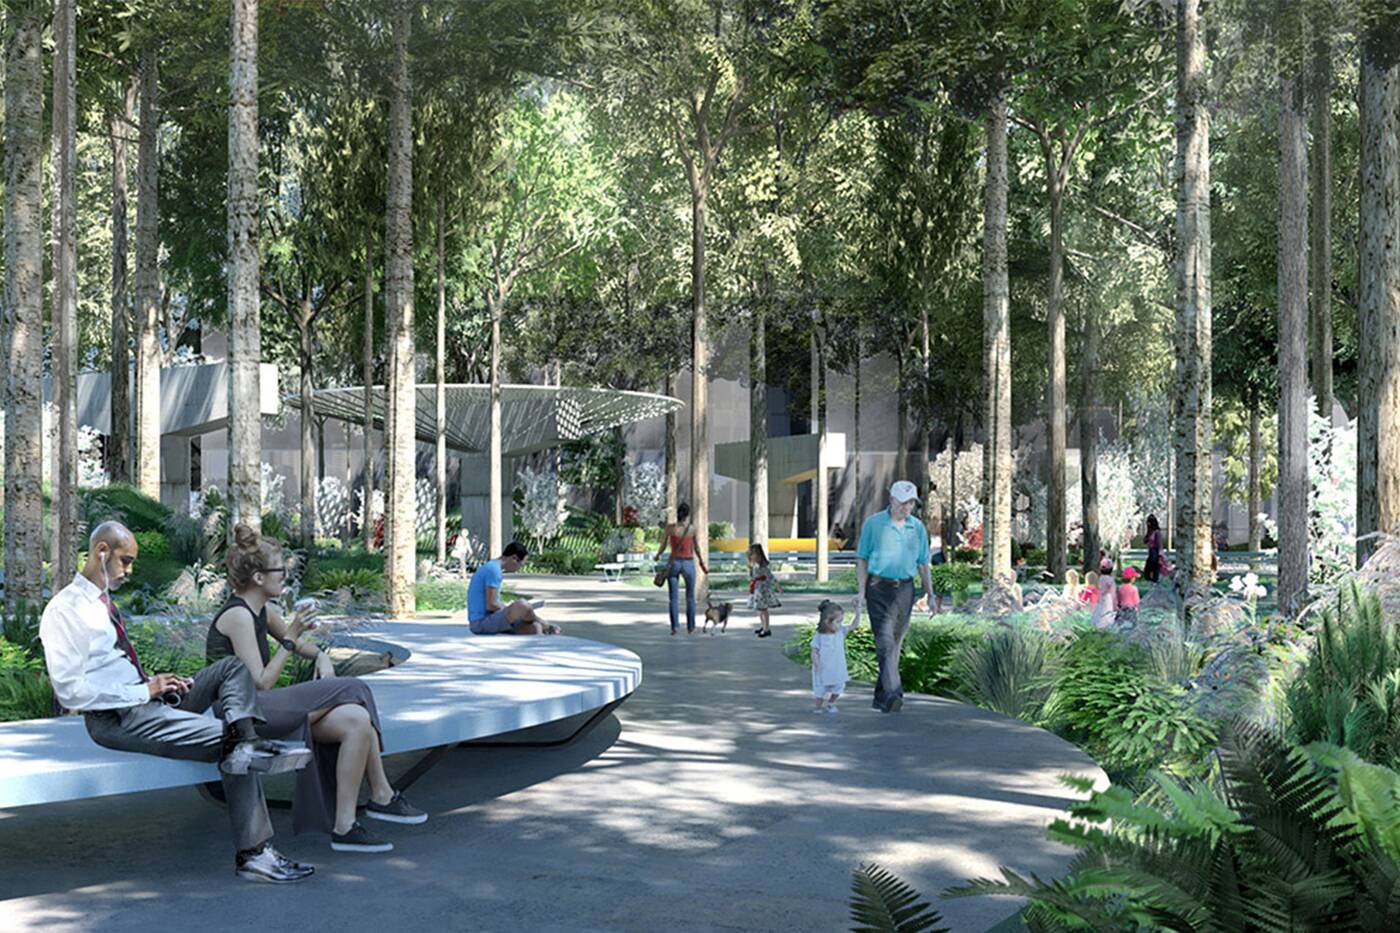 waterfront park design competition